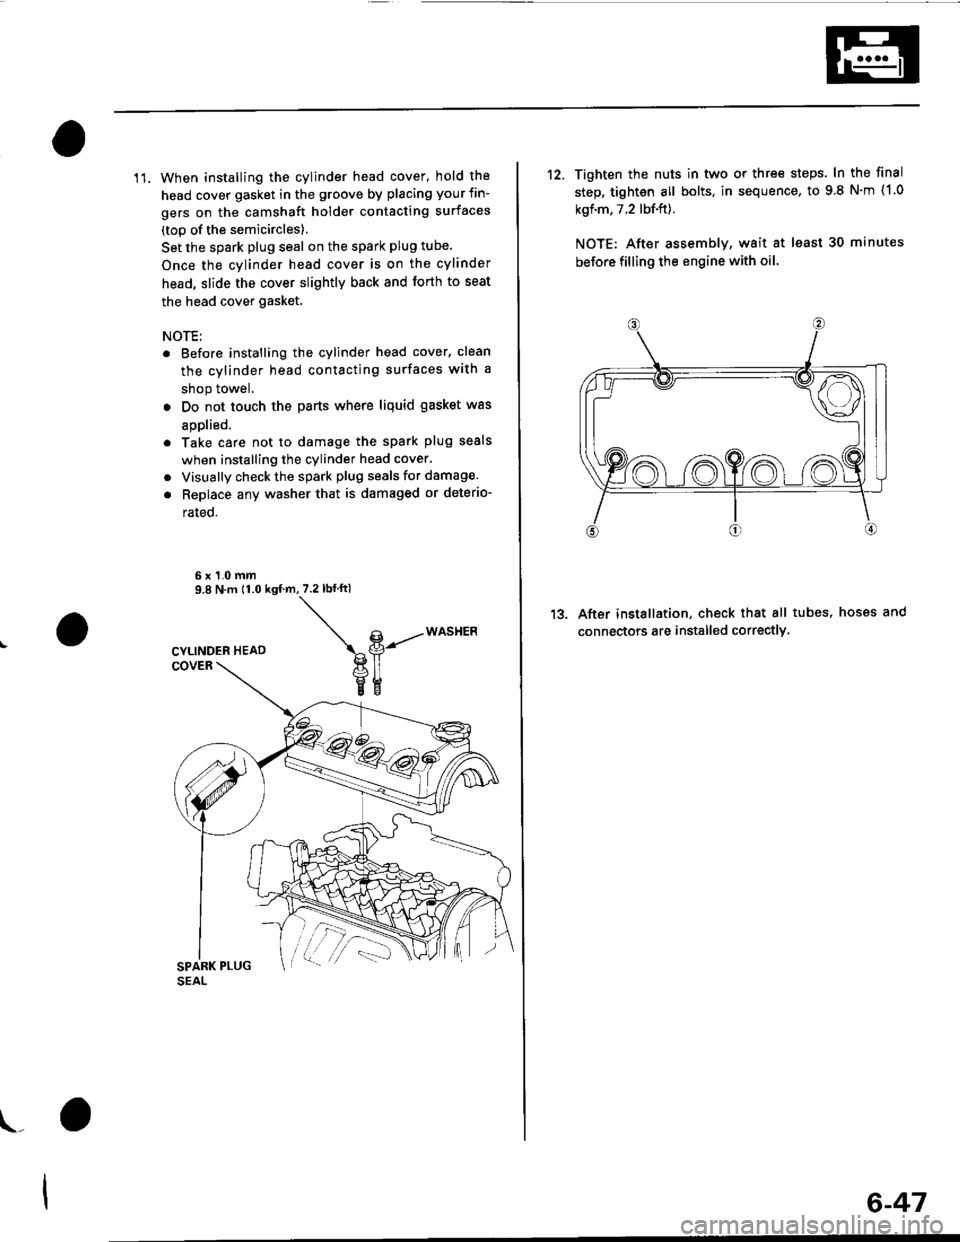 HONDA CIVIC 1998 6.G Owners Guide 11. When installing the cylinder head cover, hold the
head cover gasket in the groove by placing your fin-
gers on the camshaft holder contacting surfaces
(top of the semicircles)
Set the spark plug s